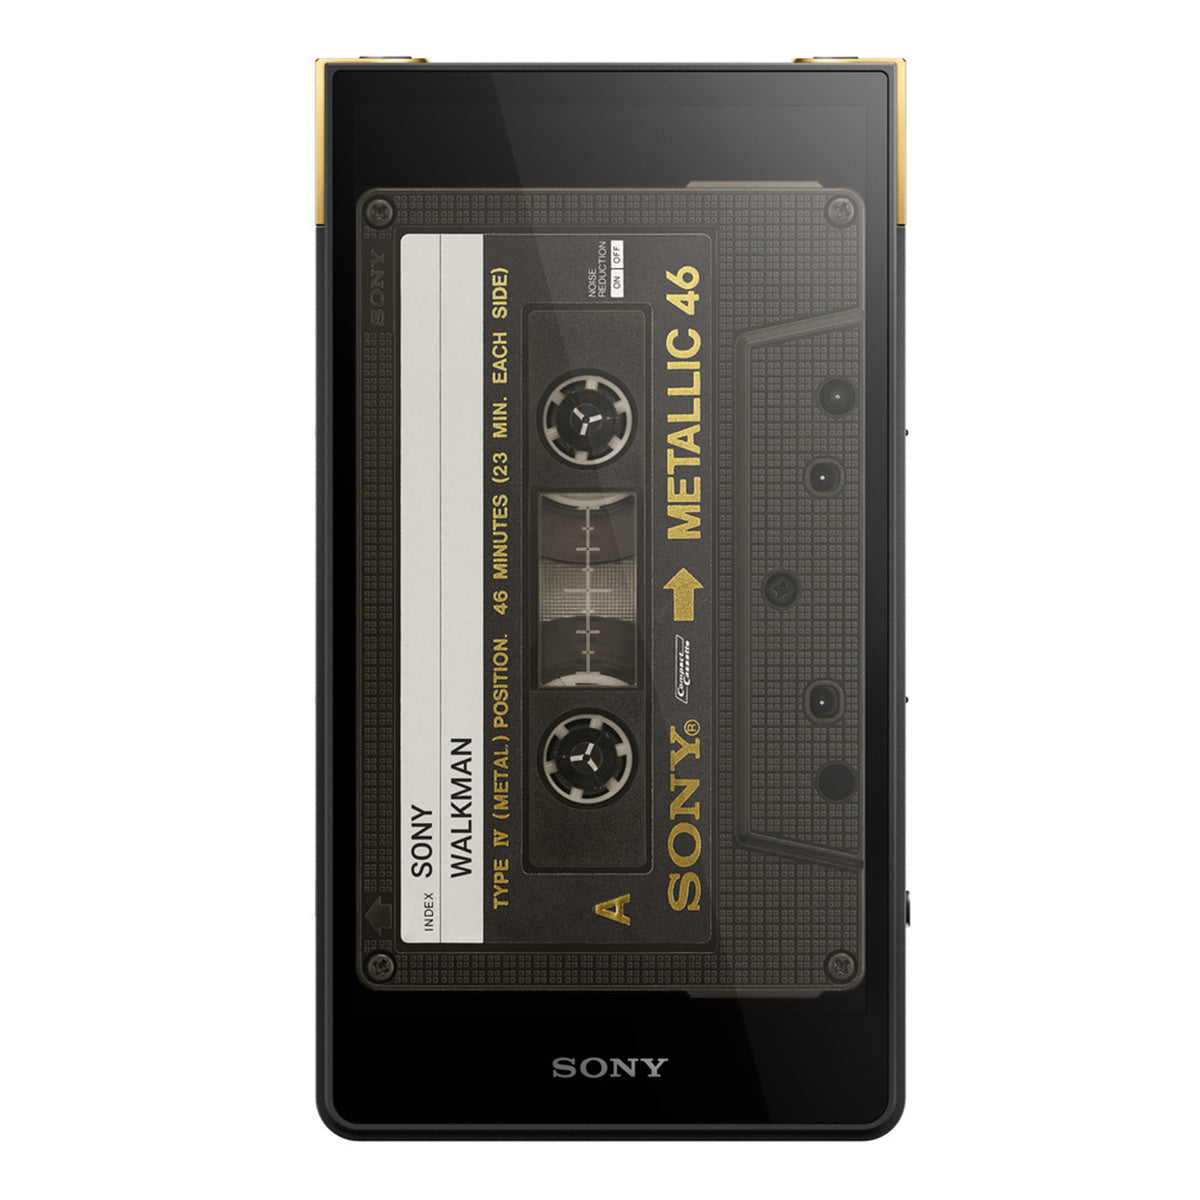 Sony NW-ZX707 Walkman ZX Series Hi-Res Digital Music Player with